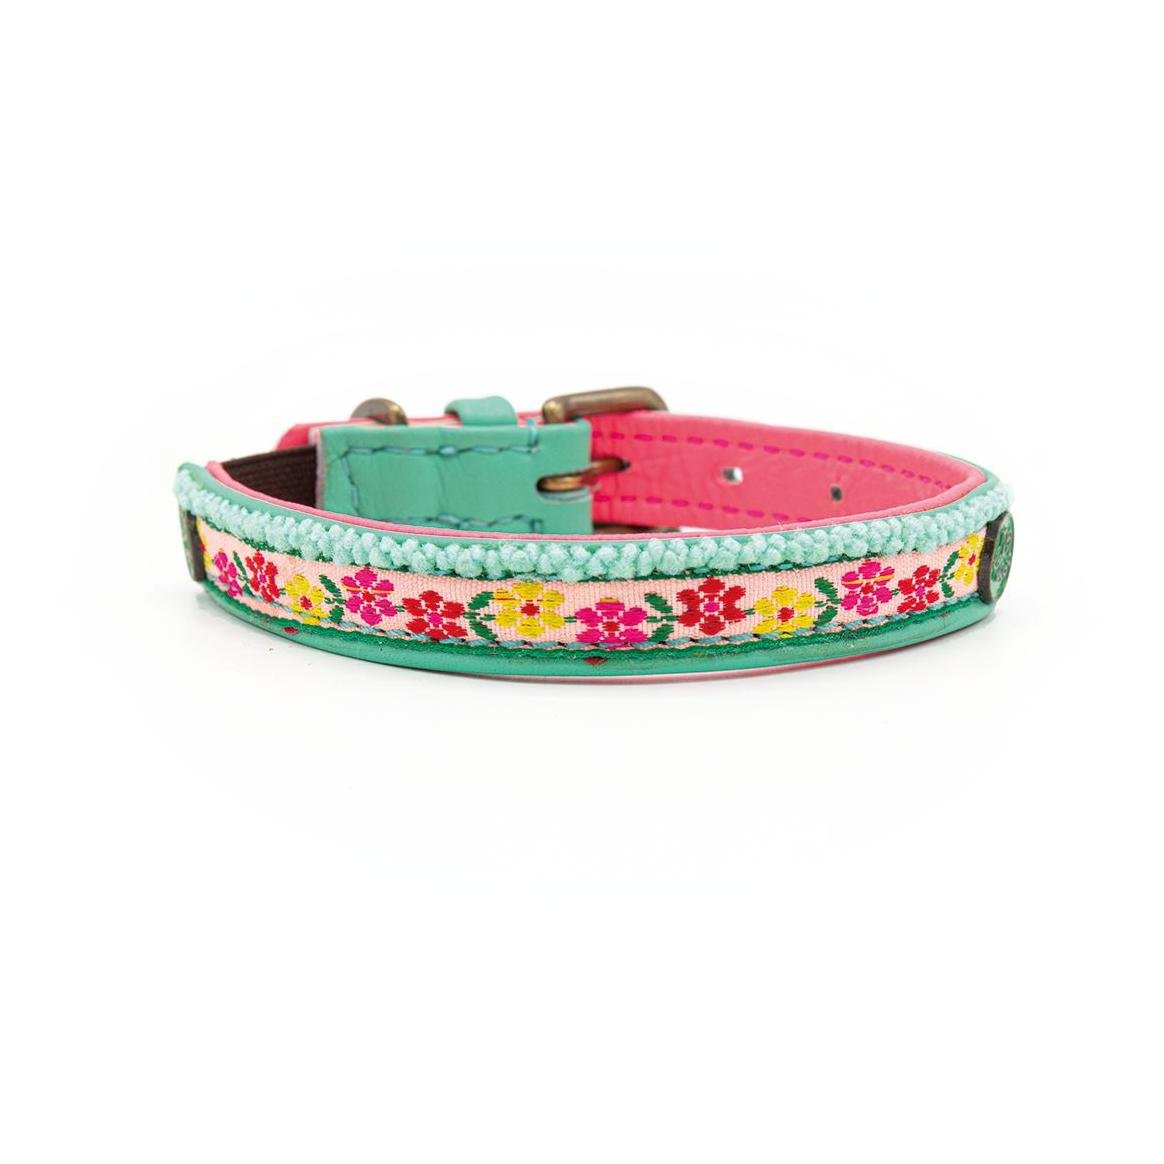 Image of Dog with a mission Kitty Katzenhalsband - Grün, Rosa / Pink, Multi - bei Hauptner.ch